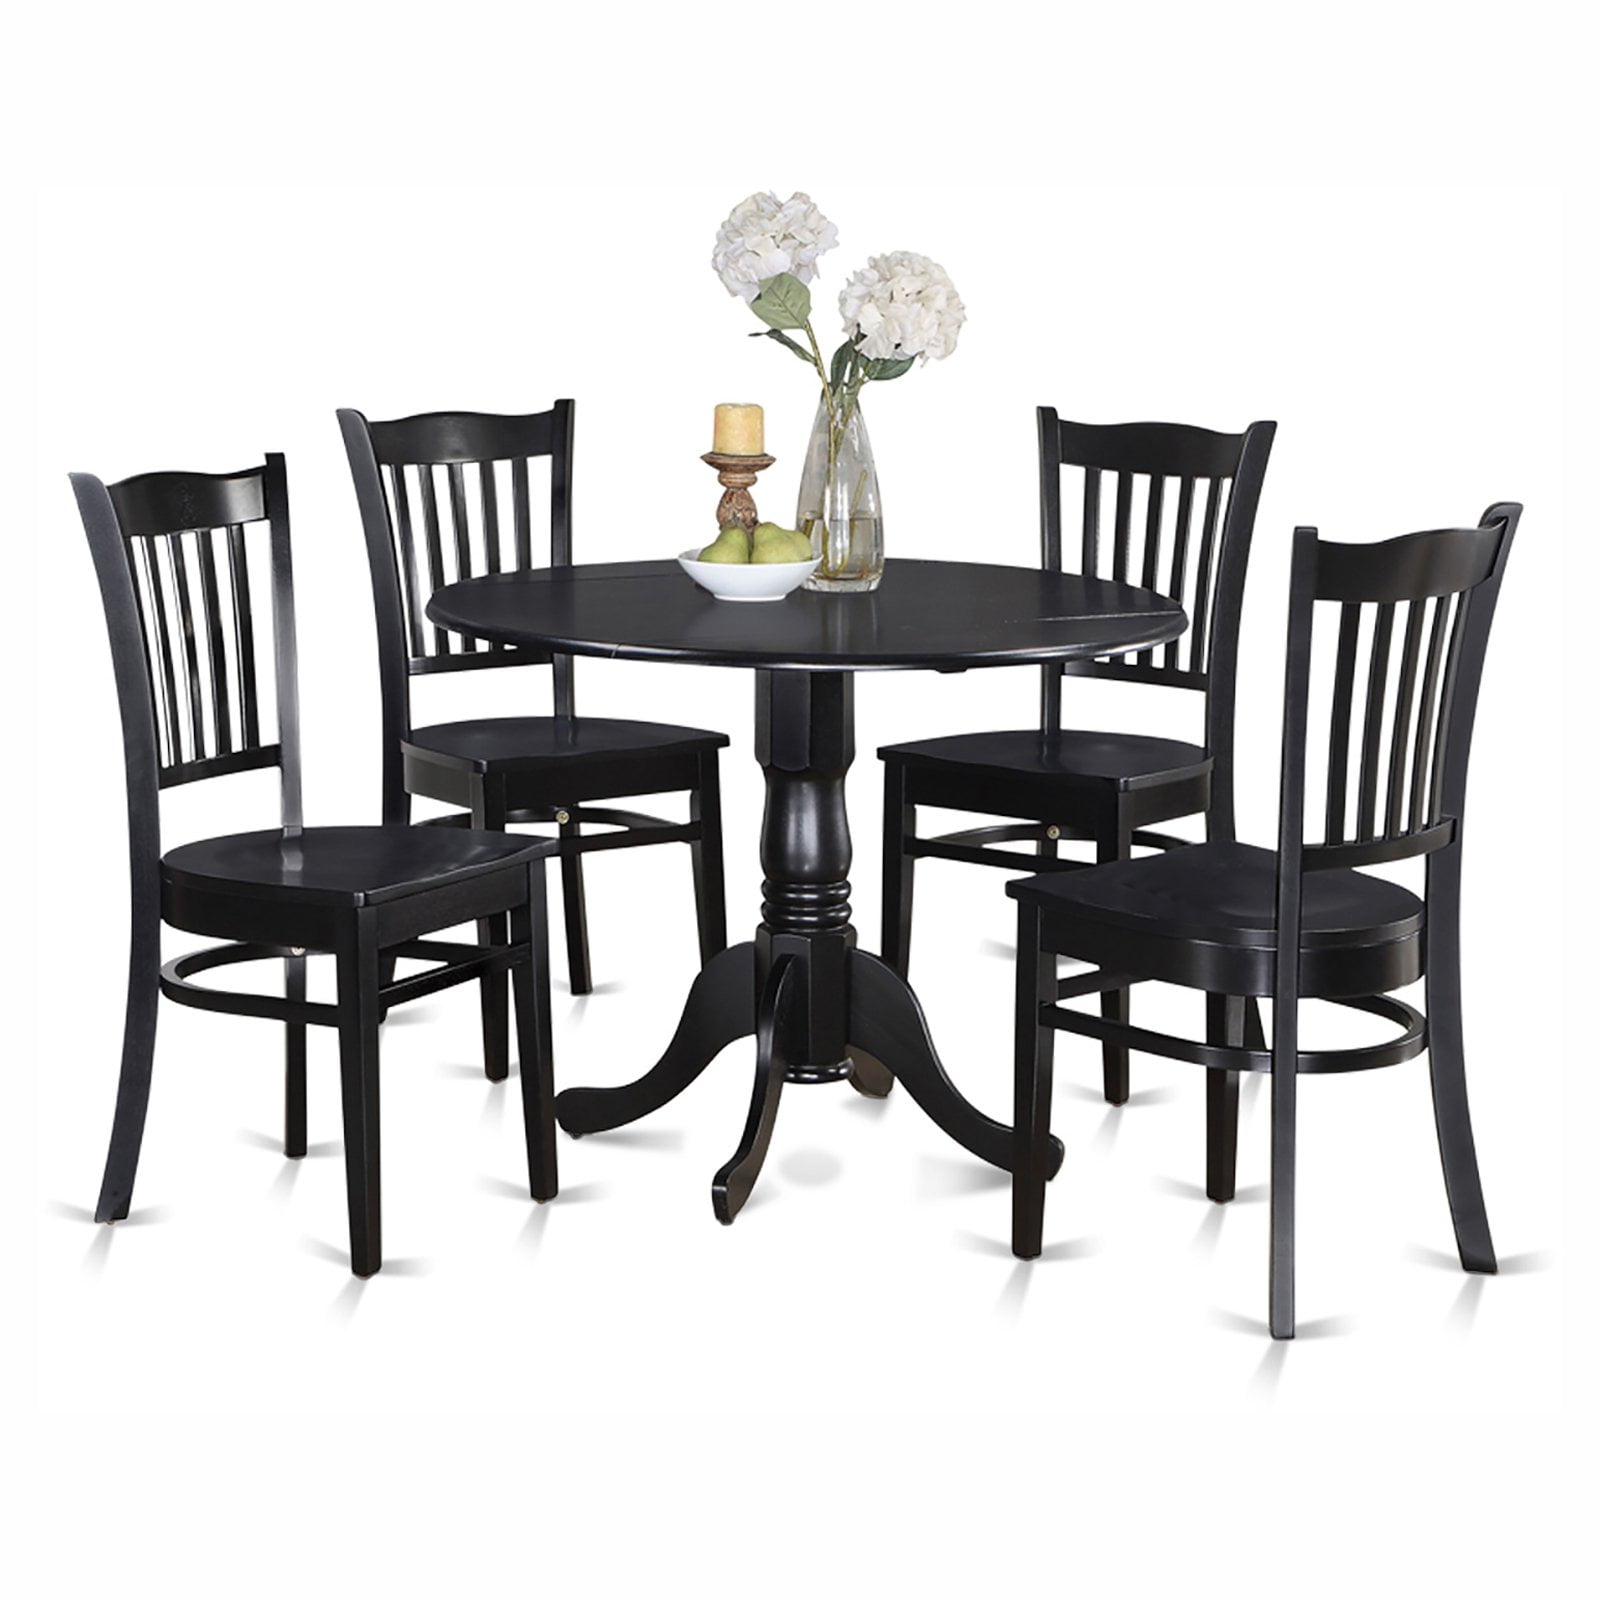 East West Furniture Dinette Dining Room Set-Finish:Black,Number of Items:5,Shape:Round,Style:Wood Seat Promo